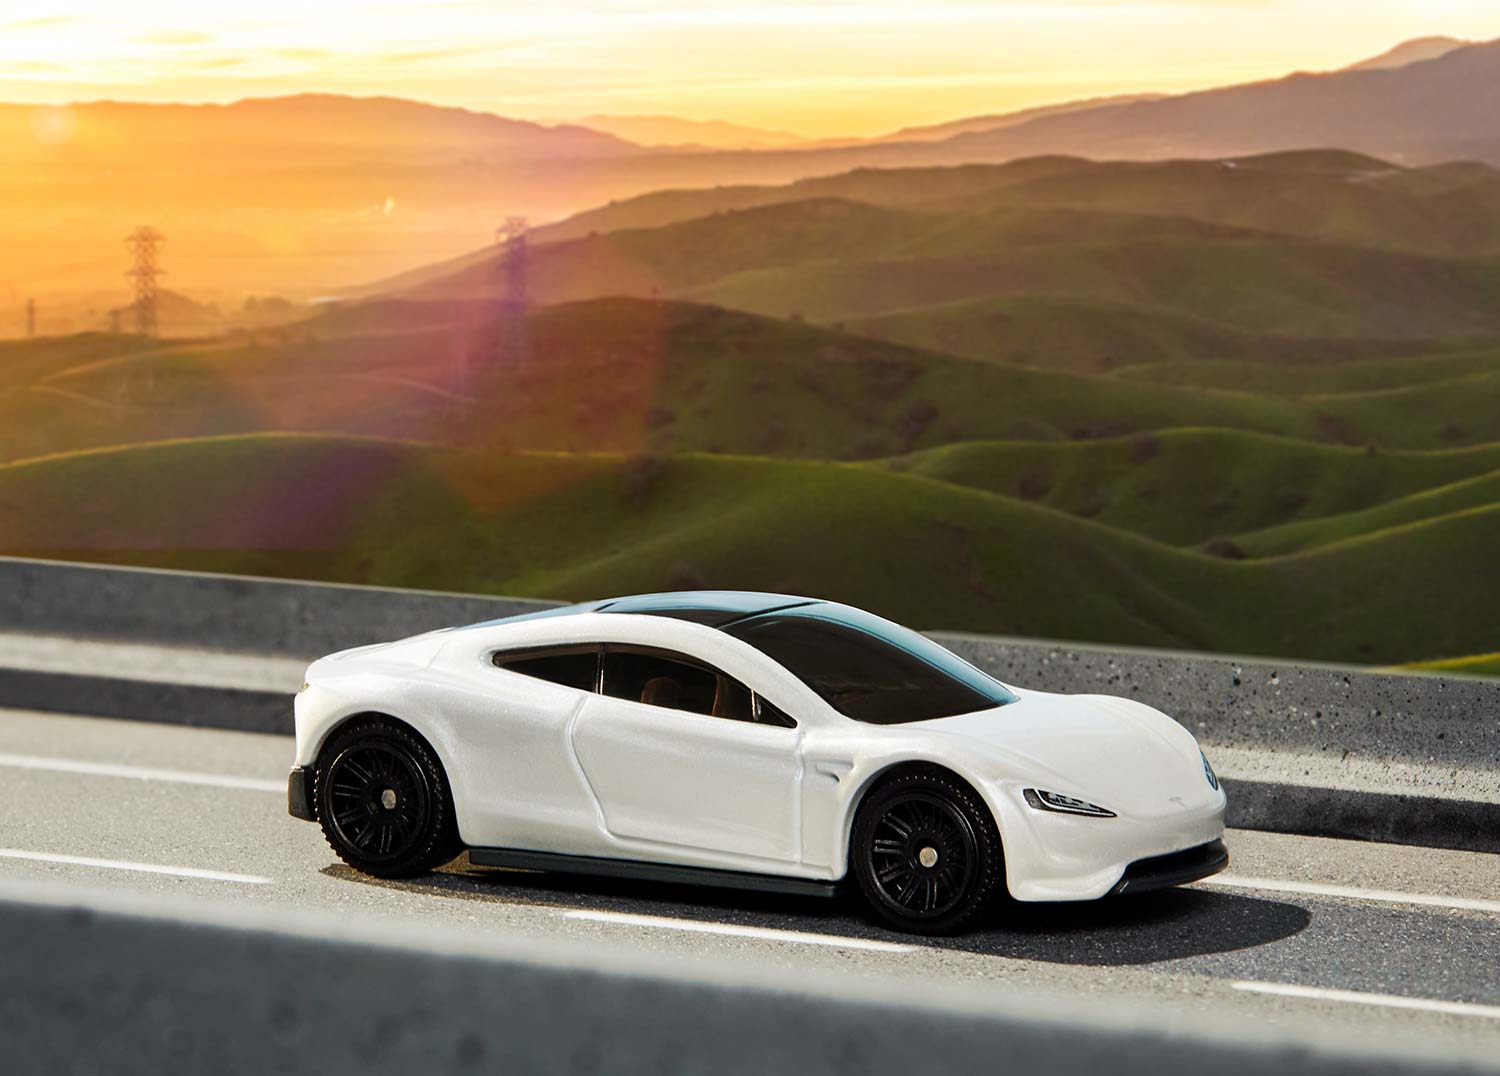 A toy car on a small road with scenery in the background